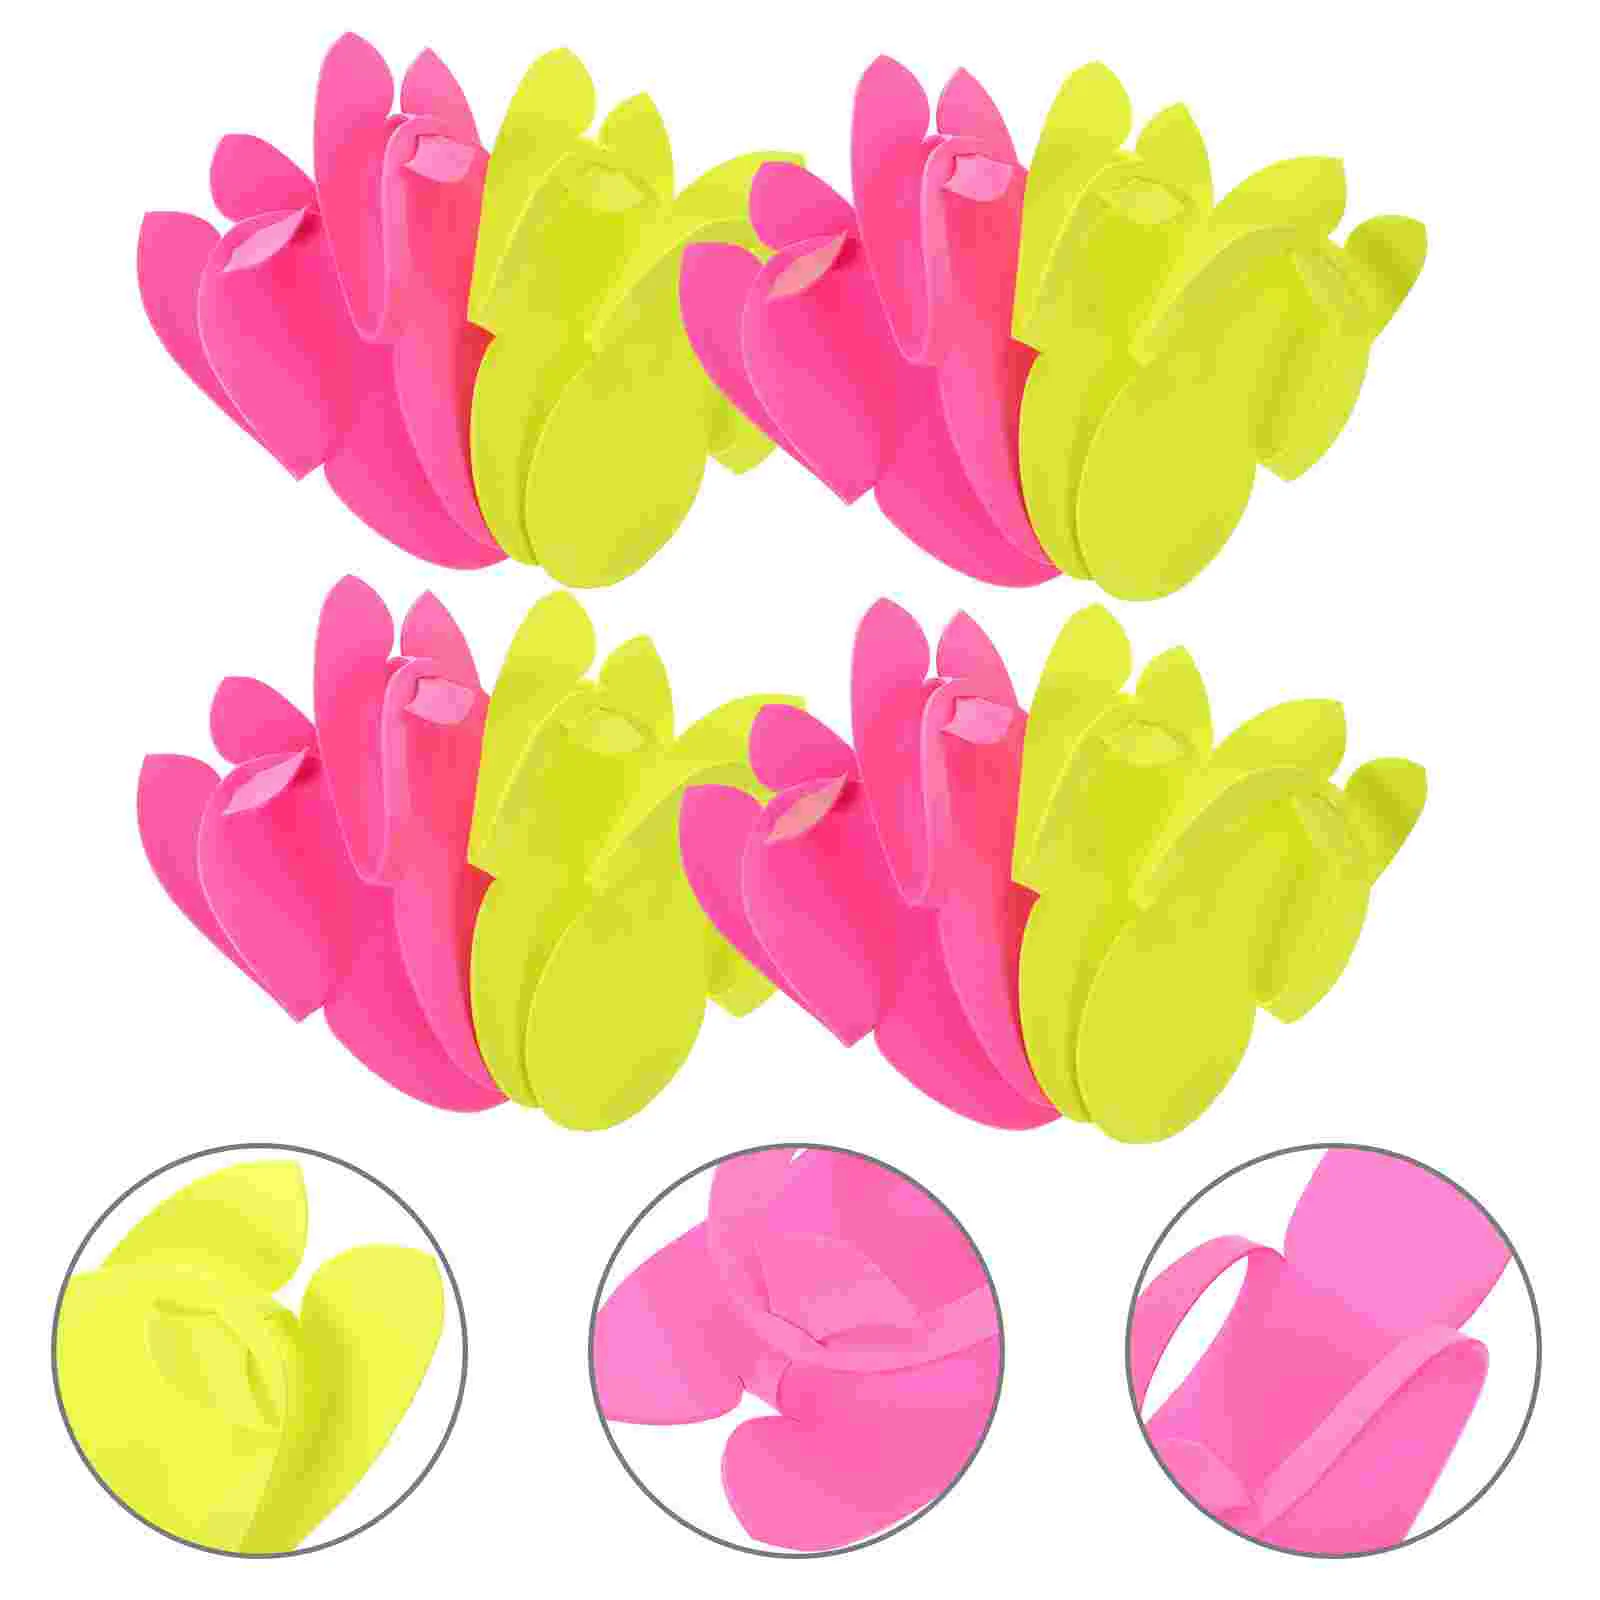 

12 Pairs Foam Slippers Mens House Sandals Manicure Footwear Spa Guests Household Eva Pedicure Shoes Beach Party Travel